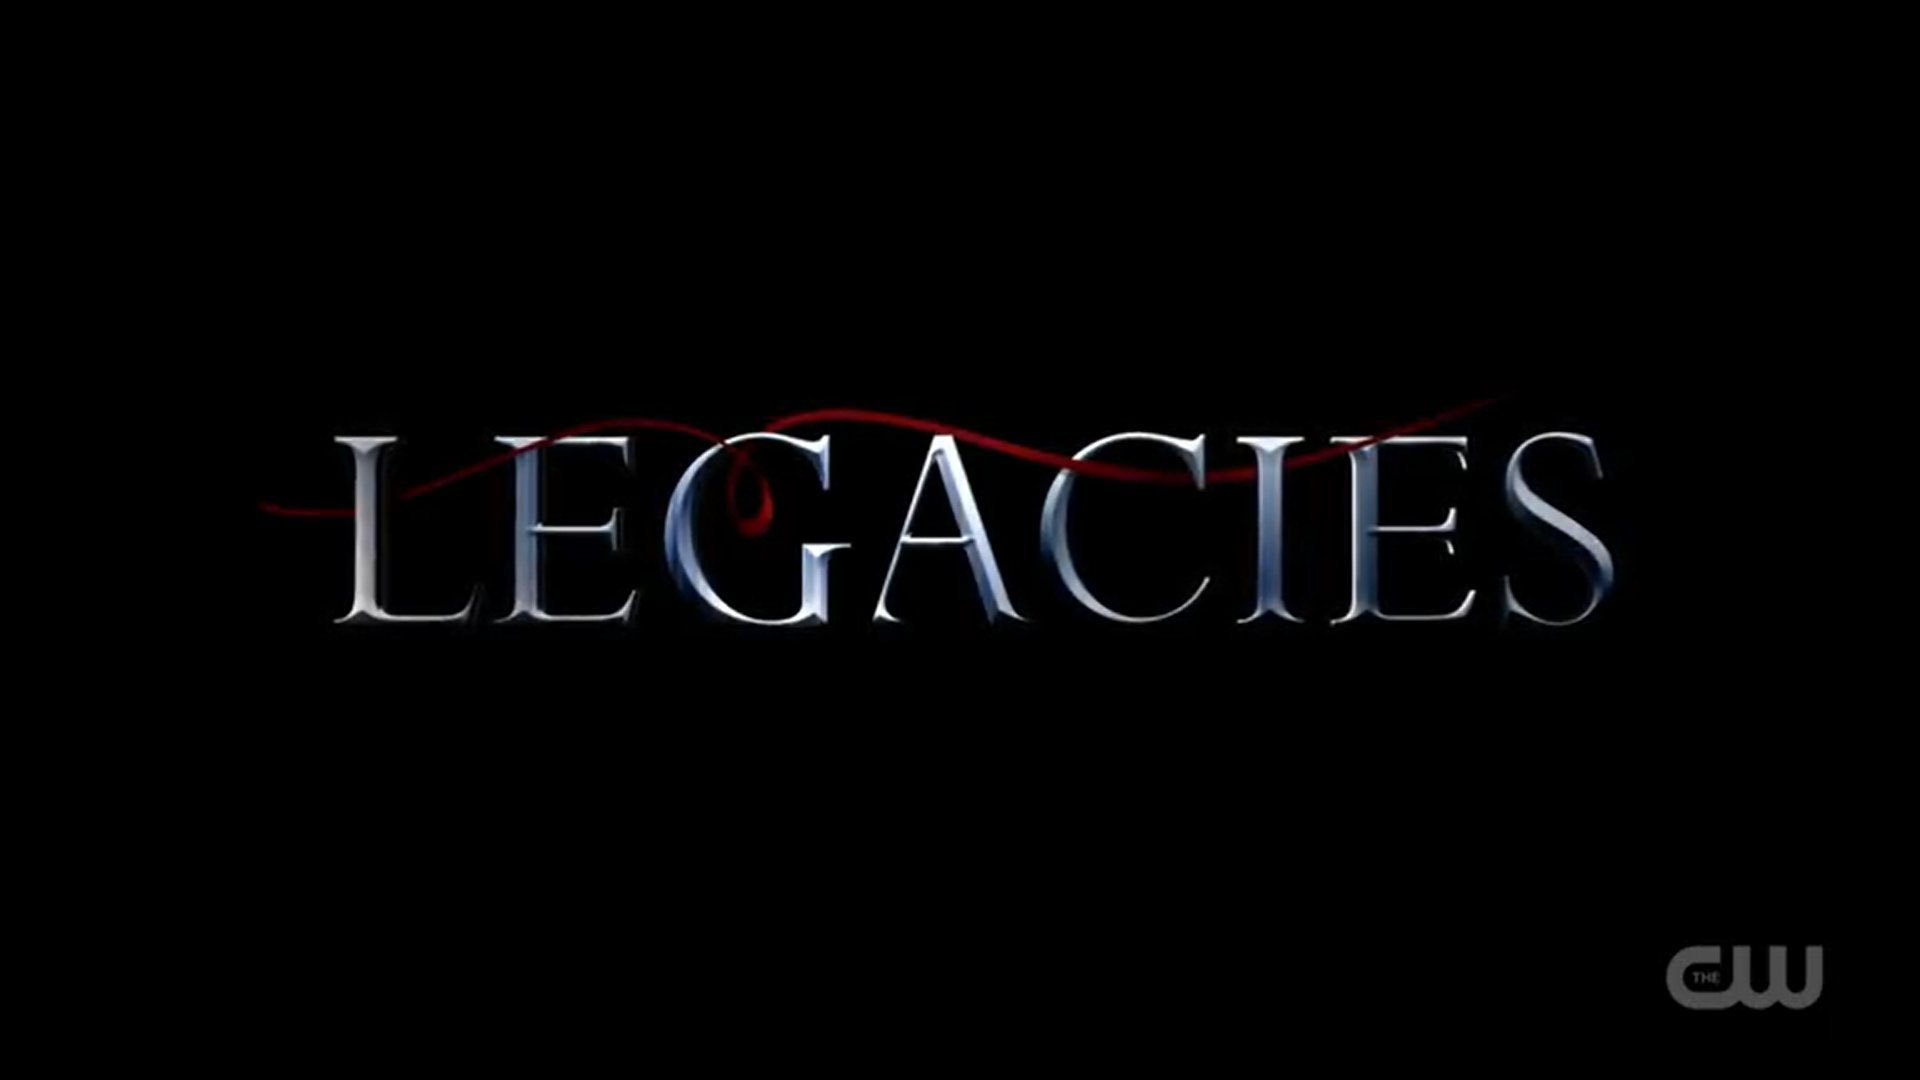 Four reasons why Legacies was doomed to fail from the onset